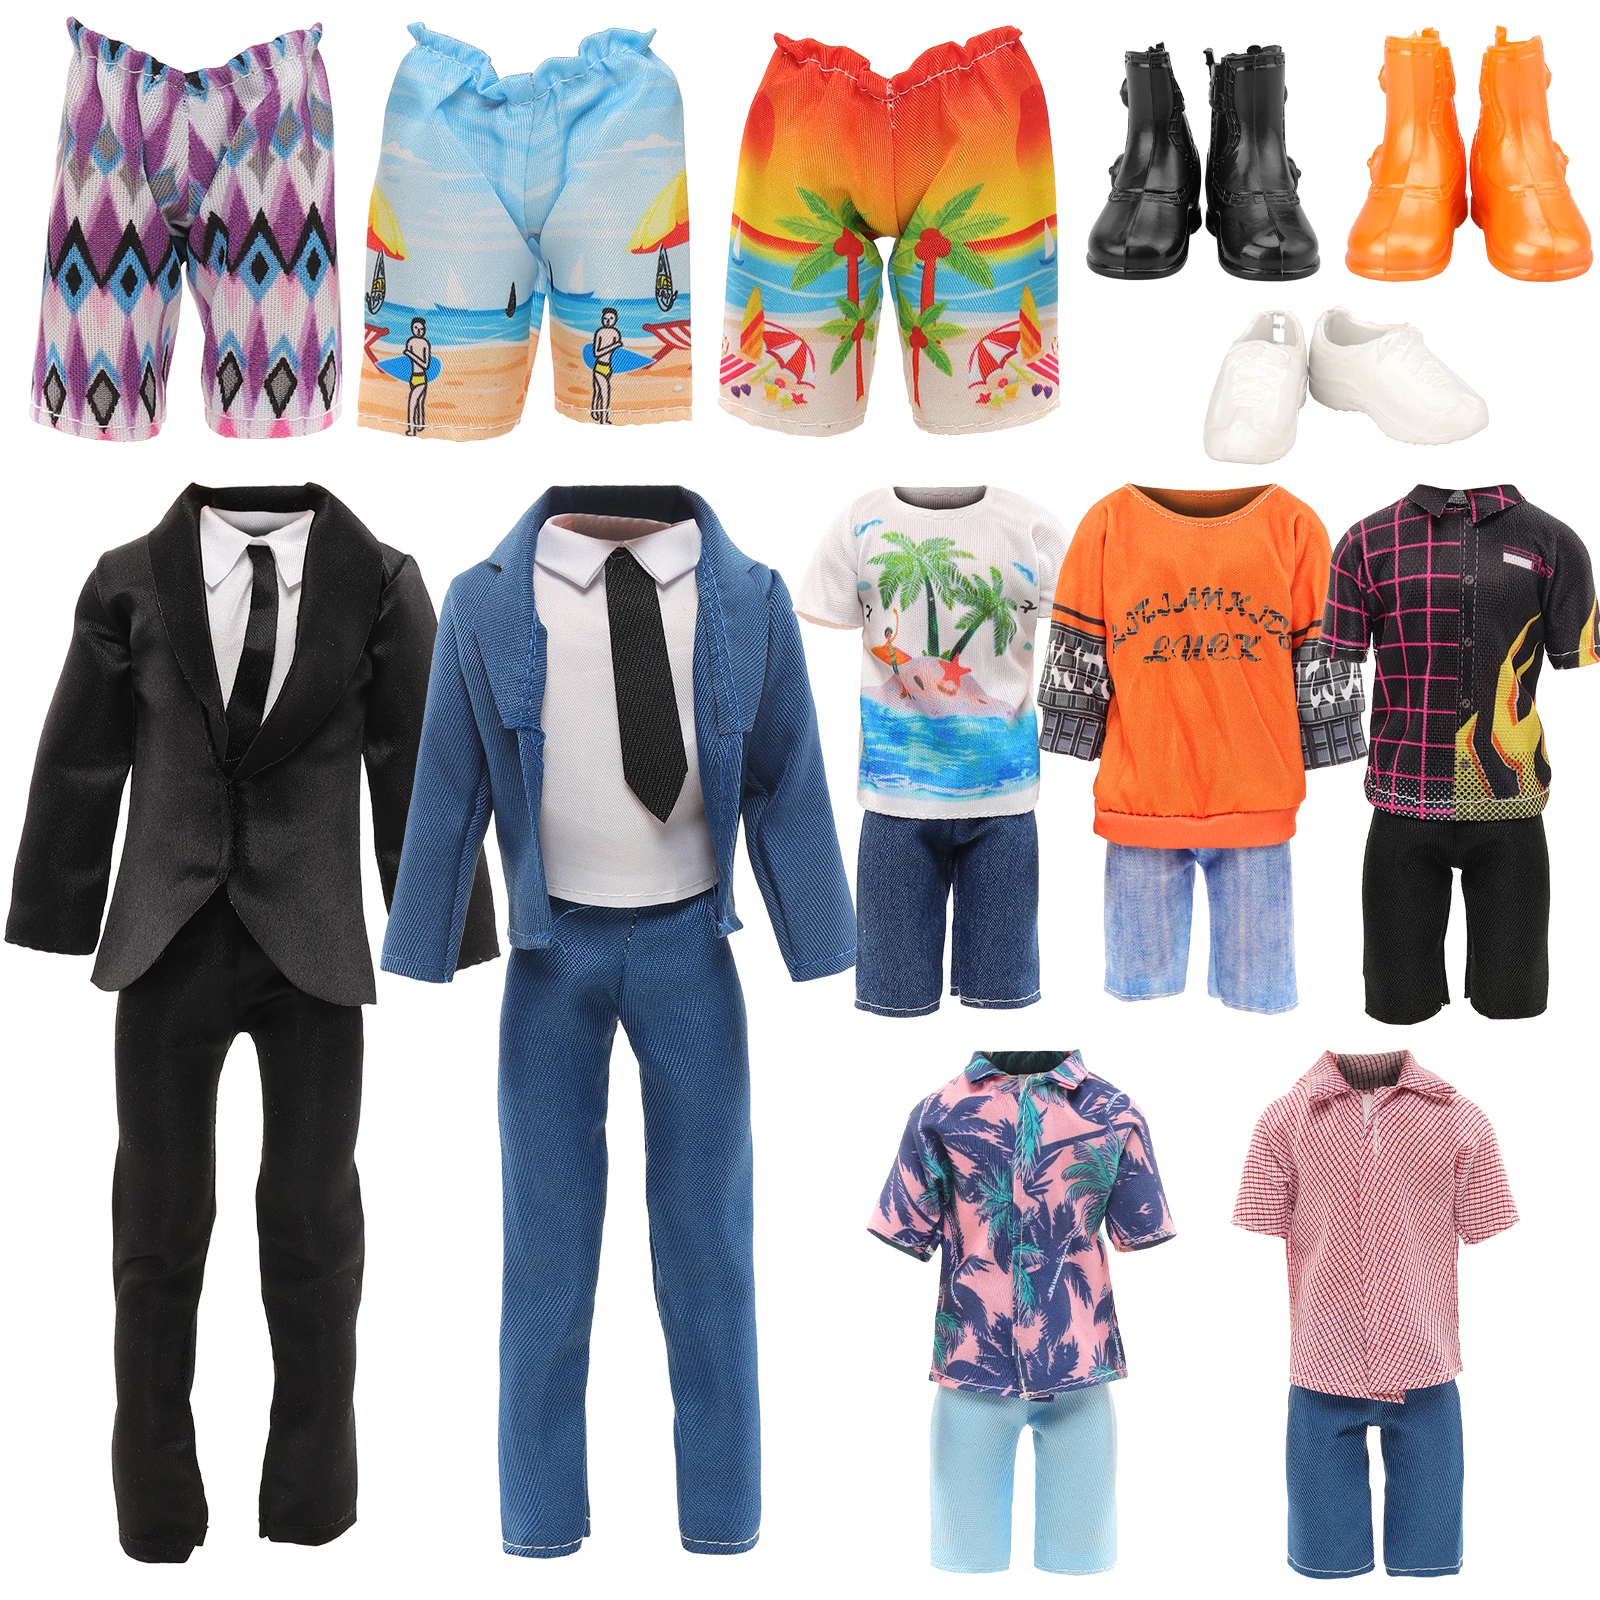 Barwa 10 pcs fashion for ken doll clothes and accessories 2 sets of suits 2 set thumb200